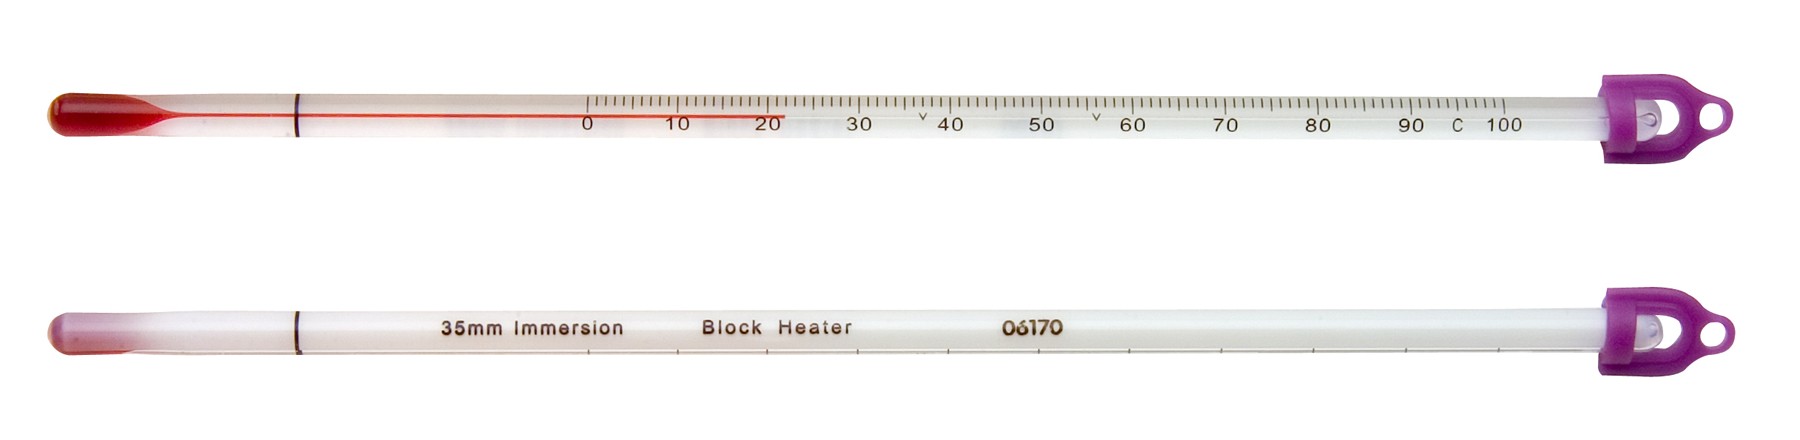 SP Bel-Art, H-B DURAC Dry Block/Incubator Liquid-In-Glass Thermometer; 0 to 70C, PFA Safety Coated, 150mm Immersion, Organic Liquid Fill